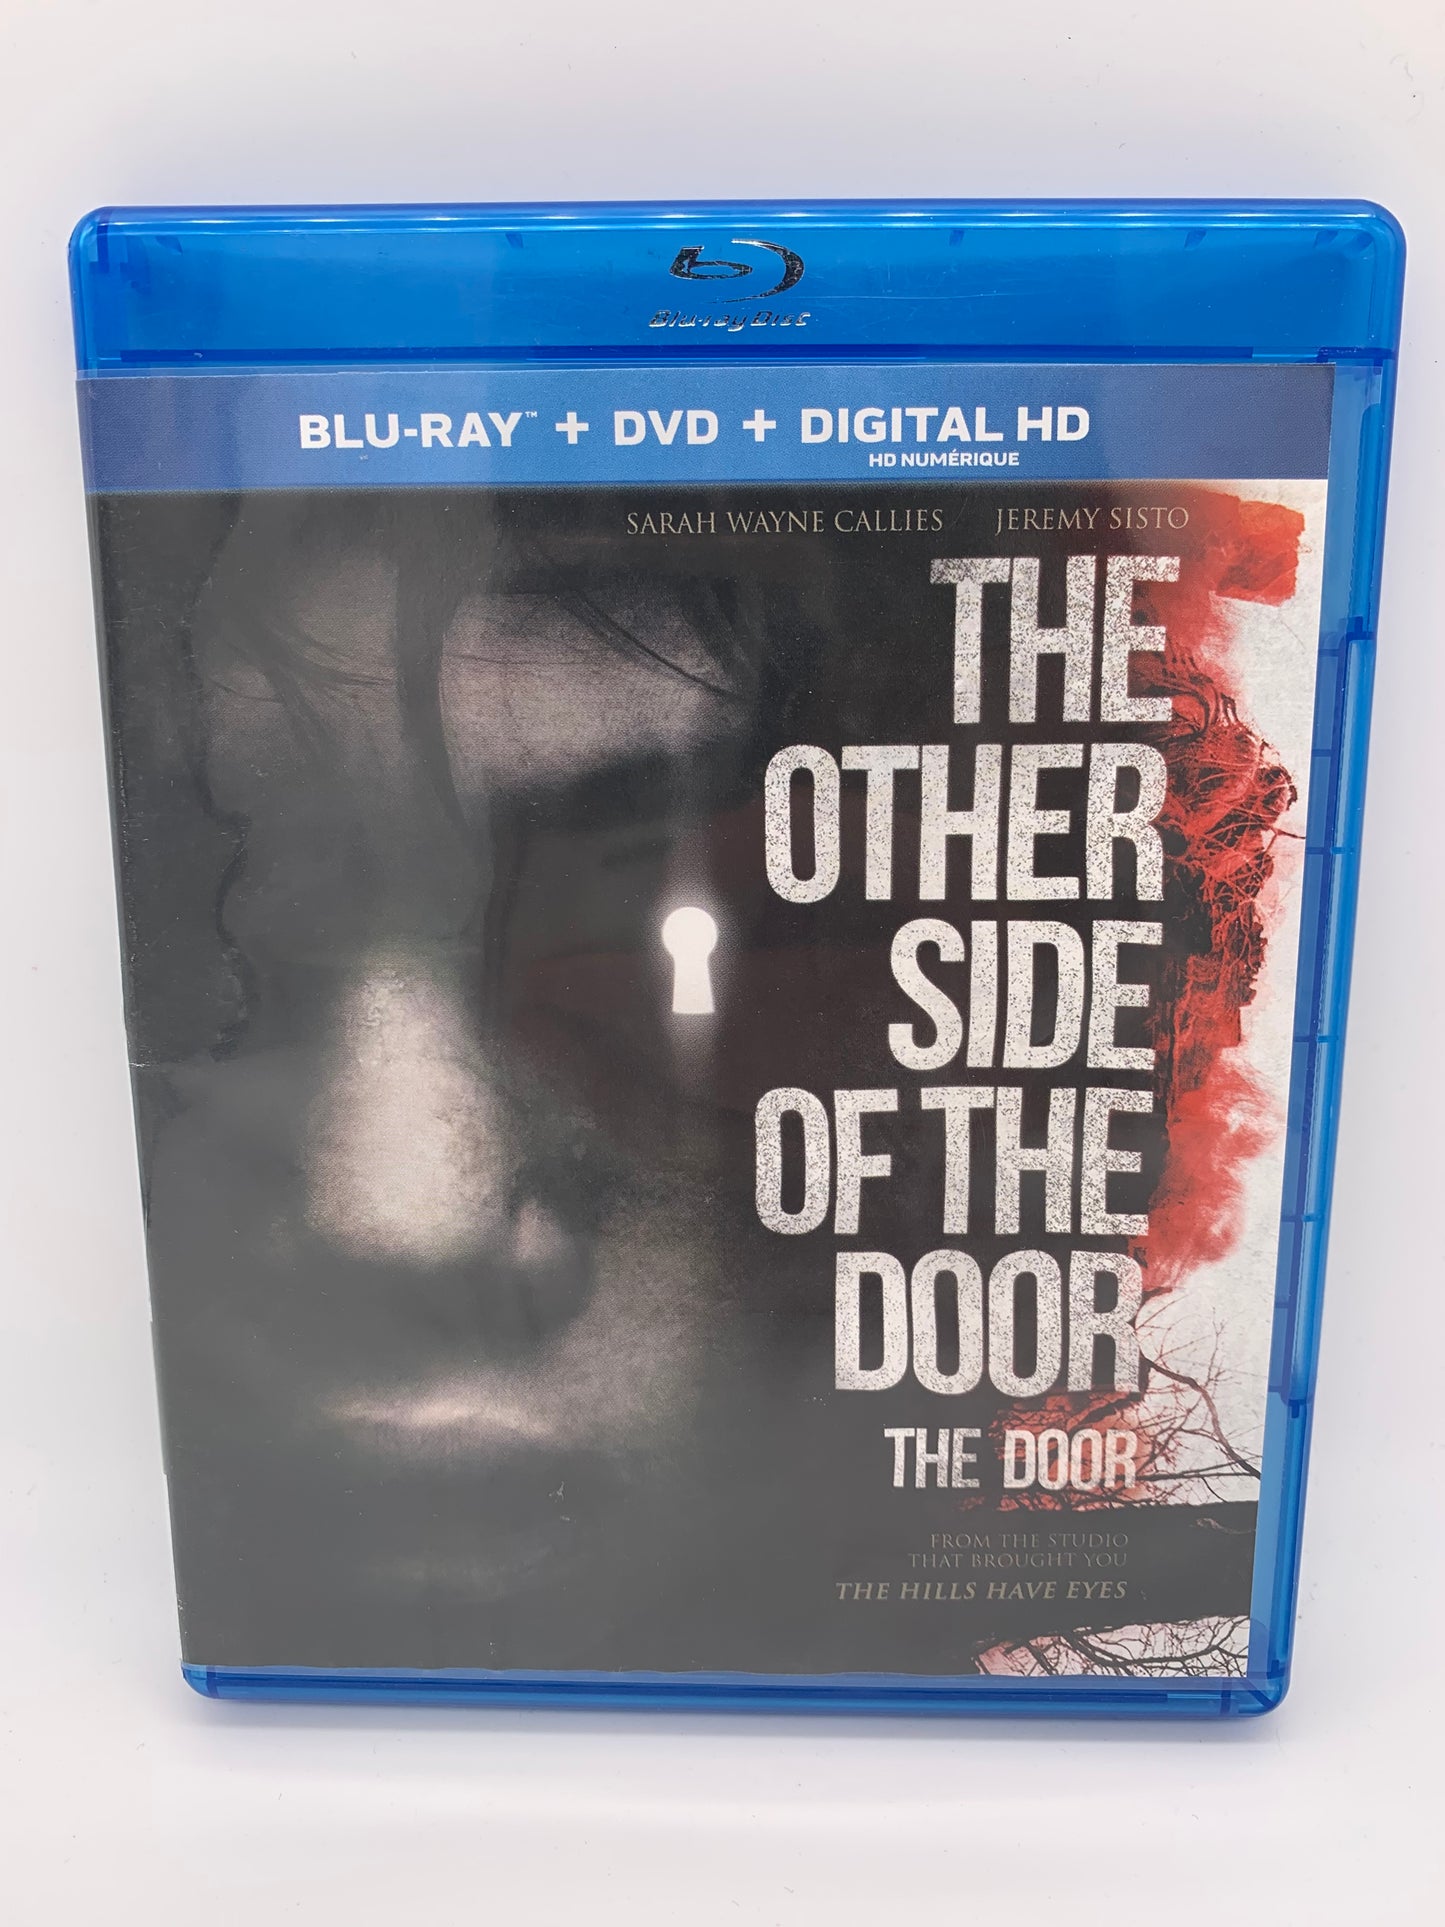 PiXEL-RETRO.COM : Movie Blu-Ray DVD THE OTHER SIDE OF THE DOOR